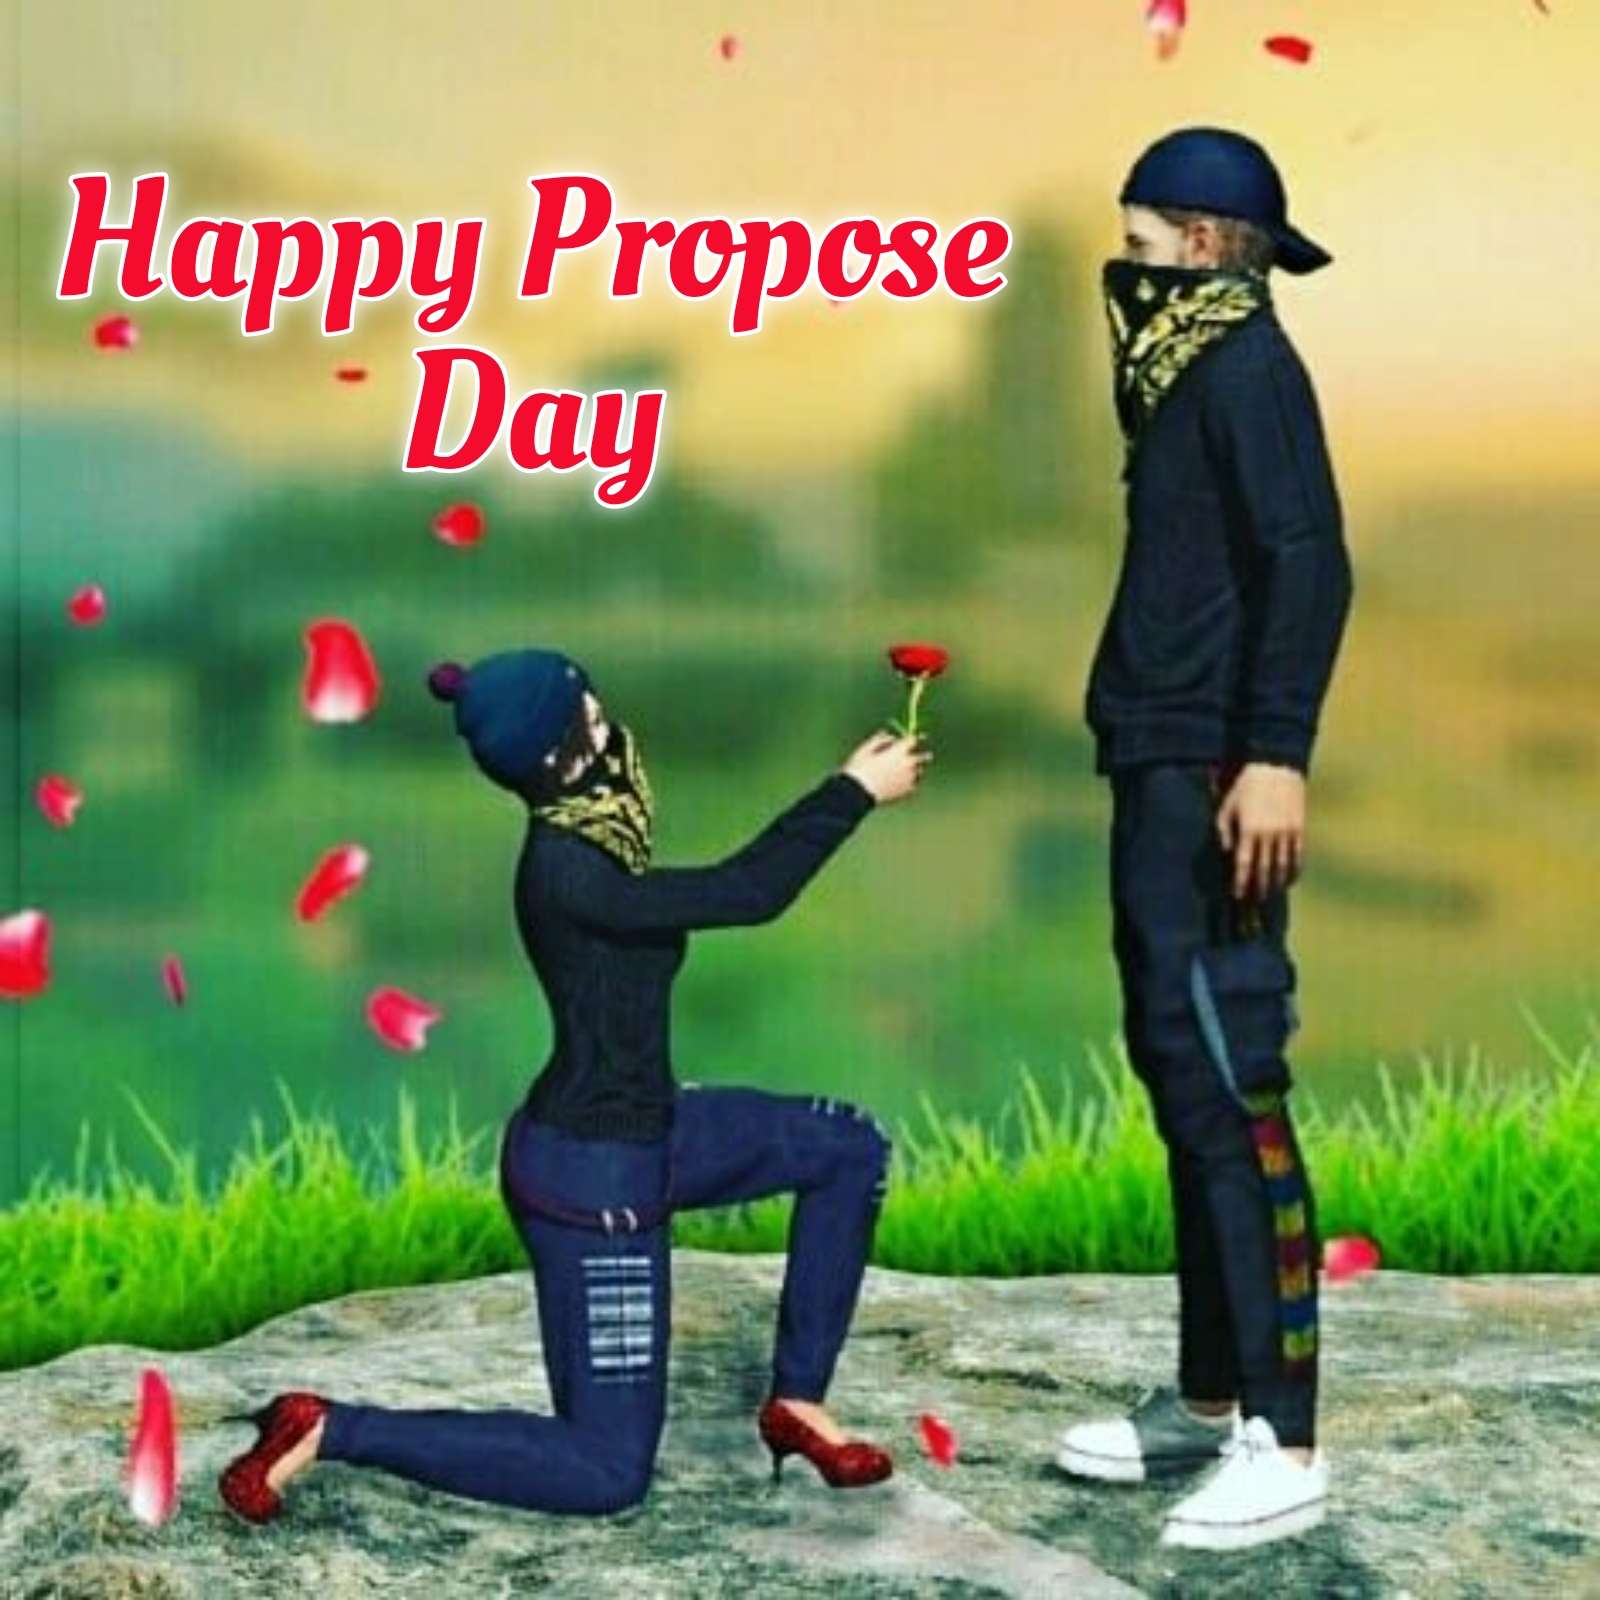 Happy Propose Day Images For Boyfriend Download